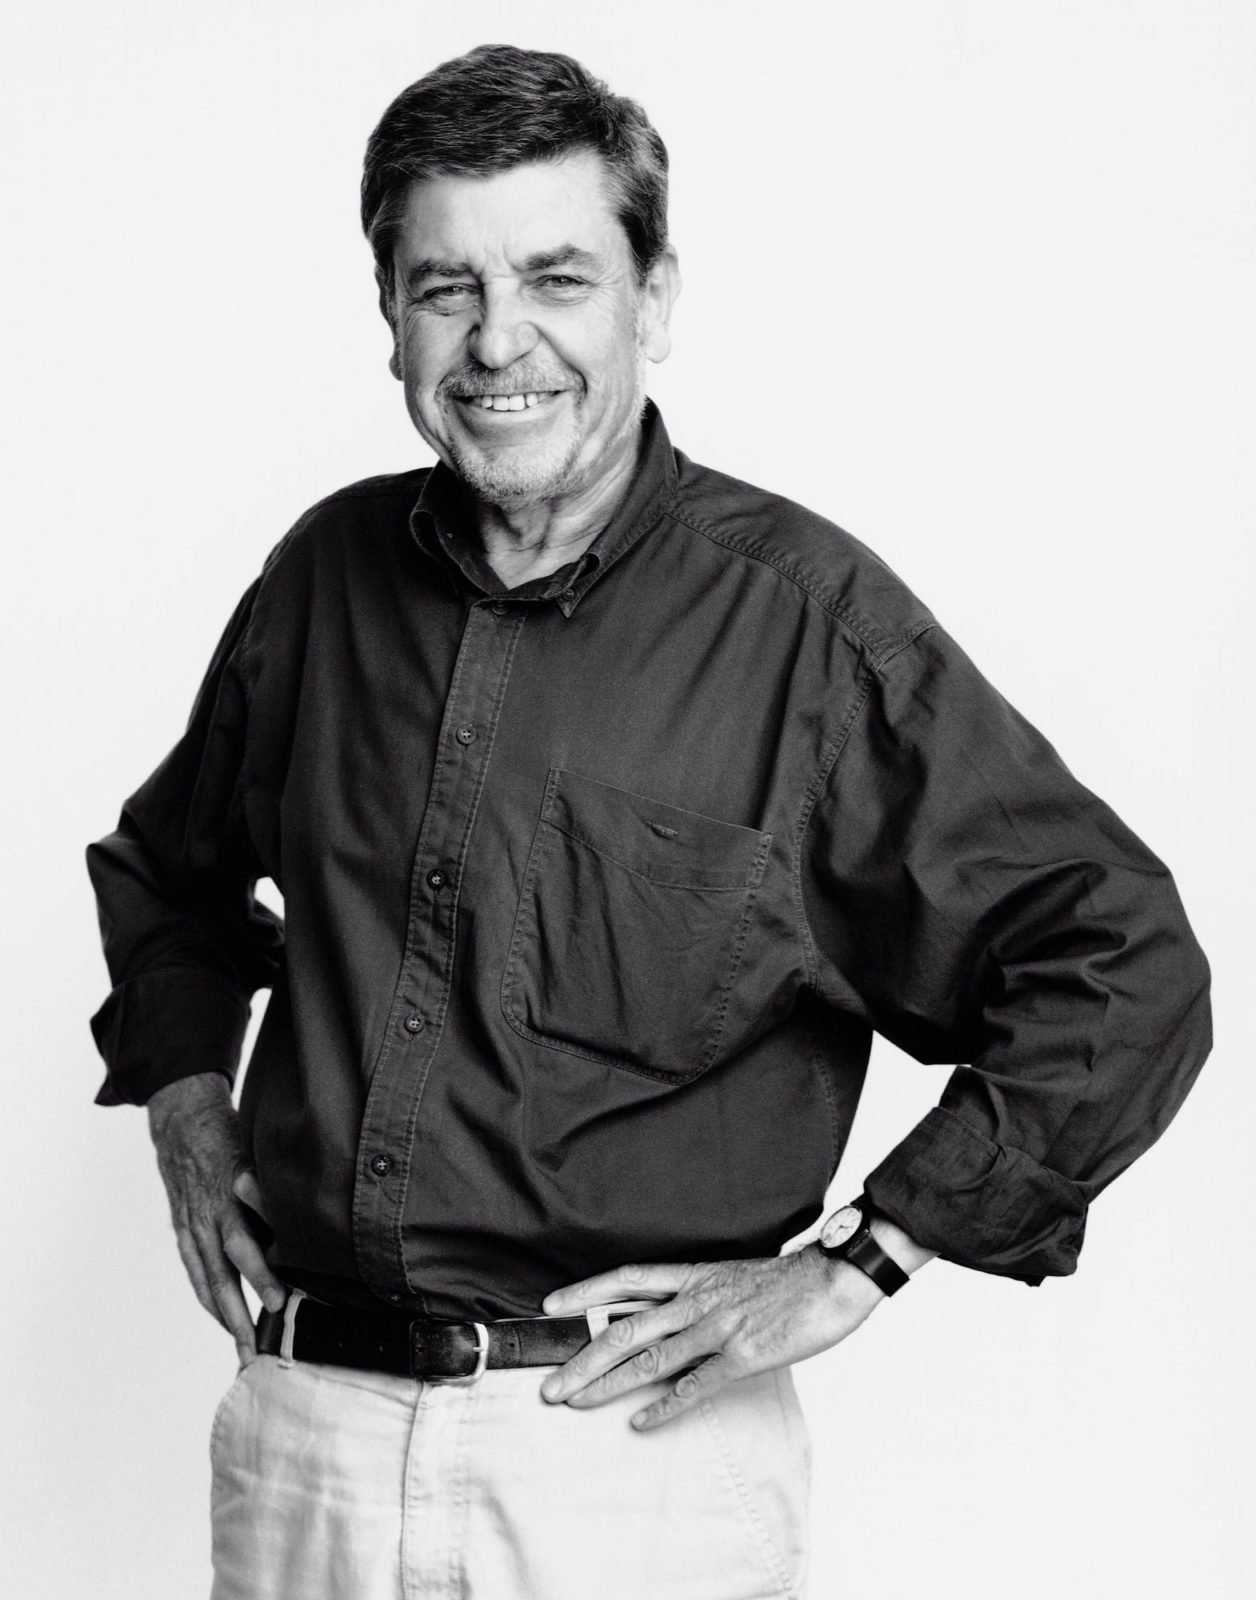 A smiling, dark-haired Tomas Jelinek, dressed in a dark shirt and light trousers, stands with hands on hips.